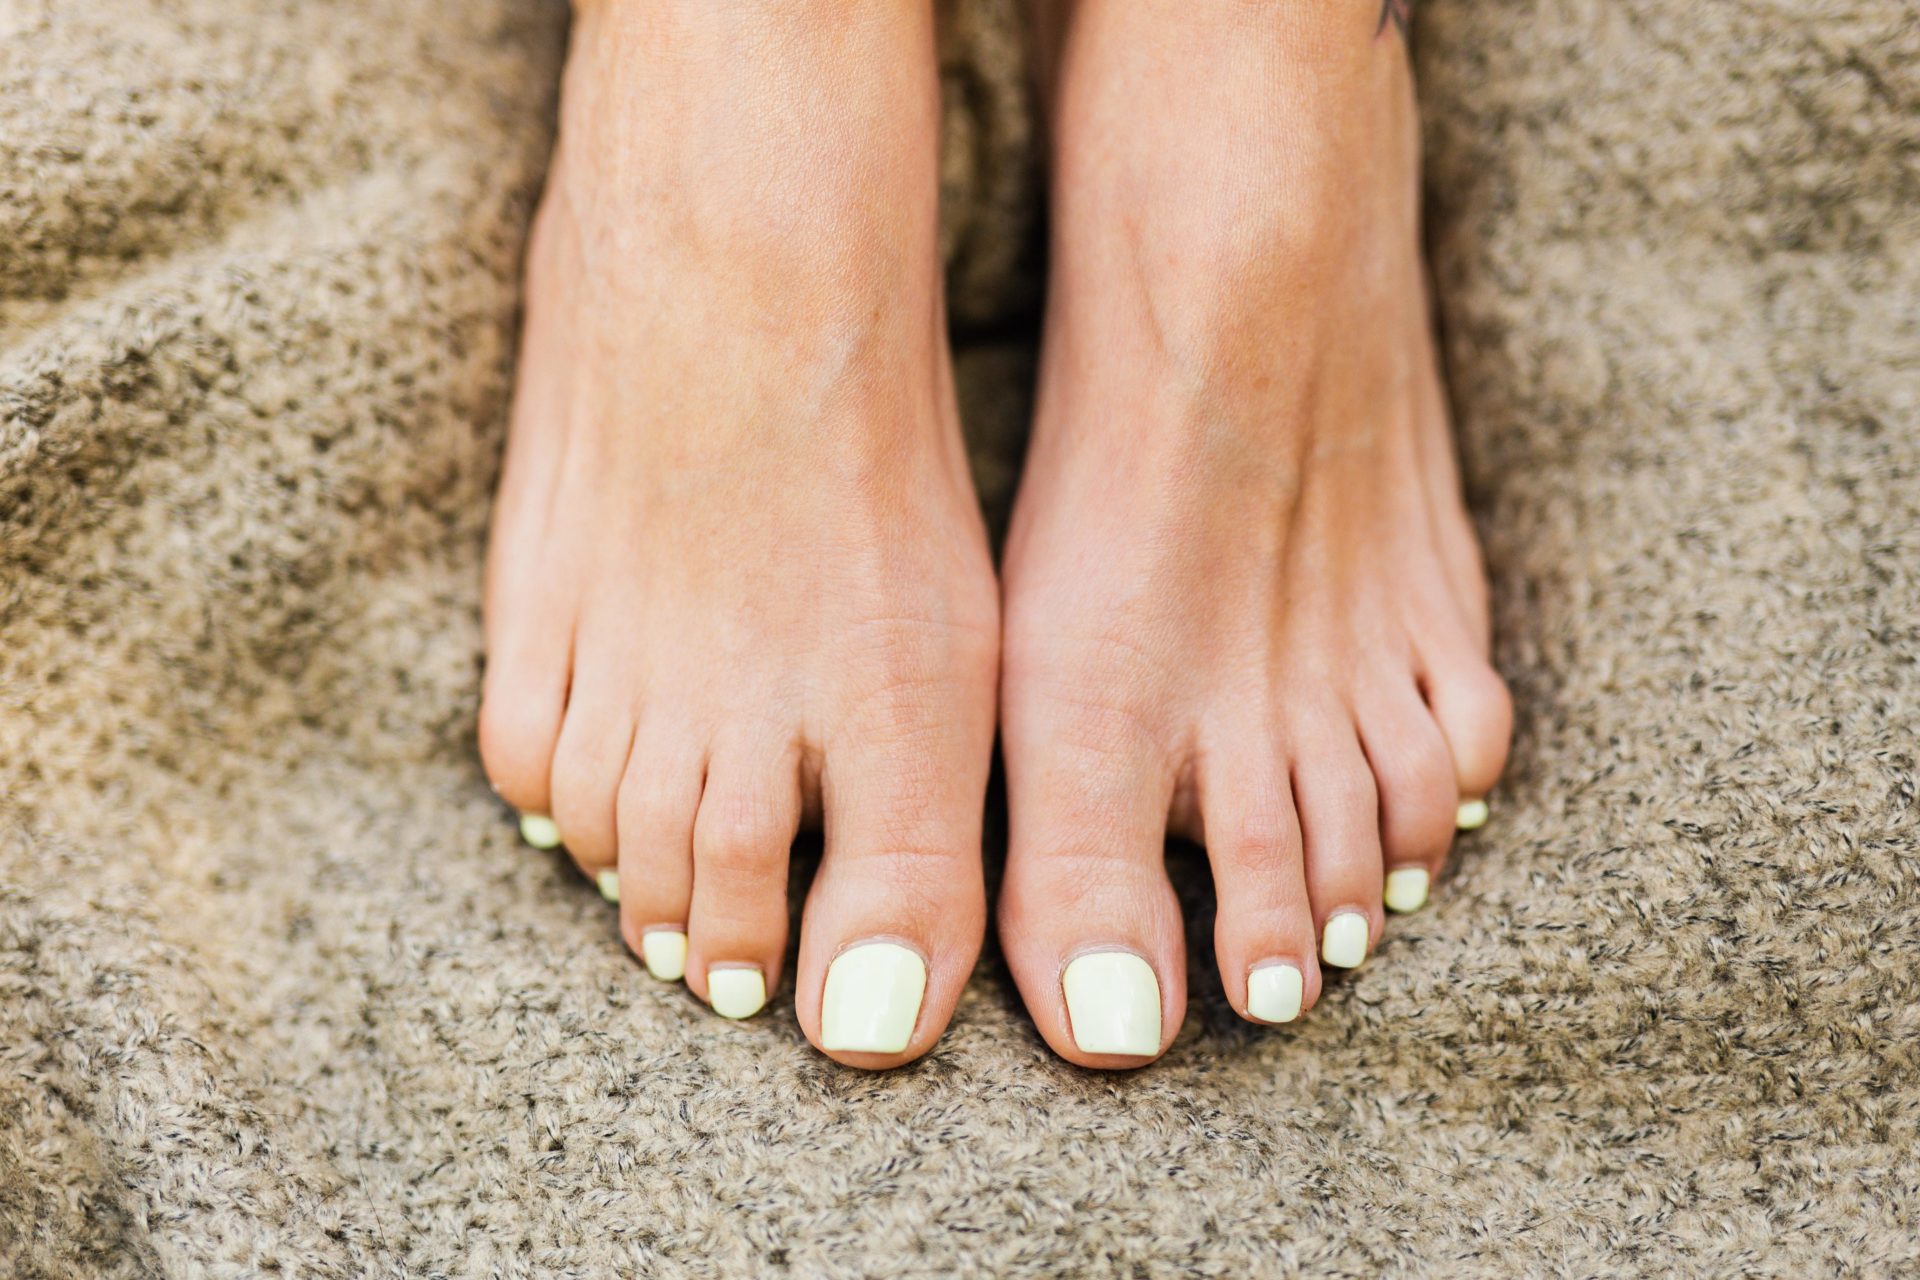 19 Different Types Of Pedicures: Most Effective Pedicures For